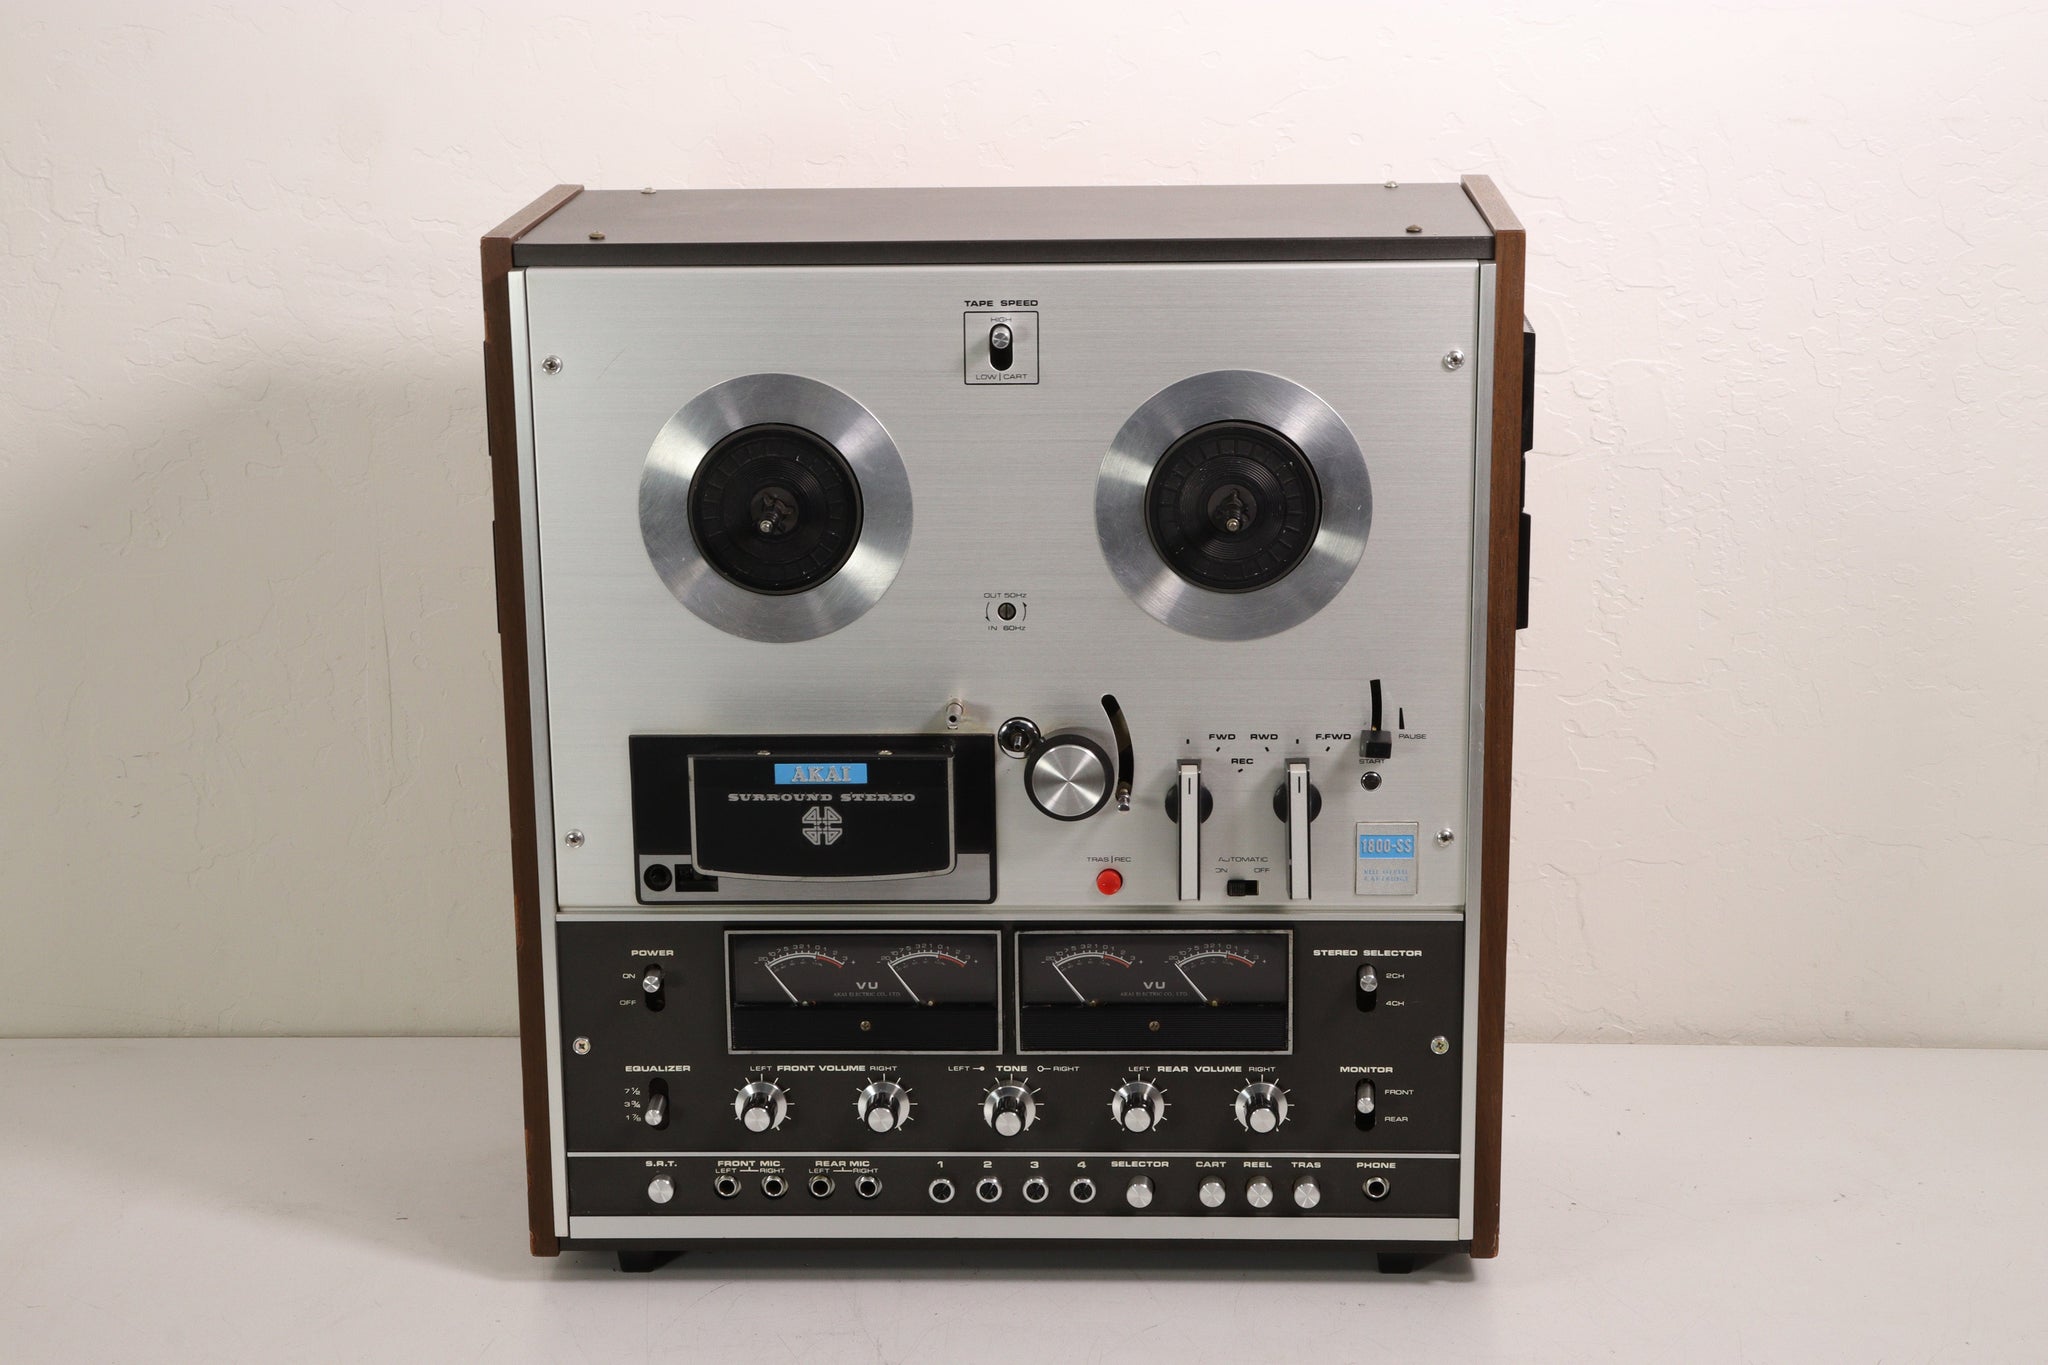 https://spencertified.com/cdn/shop/products/Akai-1800-SS-Reel-To-Reel-8-Track-Cartridge-Player-4-Track-Surround-Stereo-Recording-Reel-to-Reel-Tape-Players-Recorders_2048x2048.jpg?v=1674766684